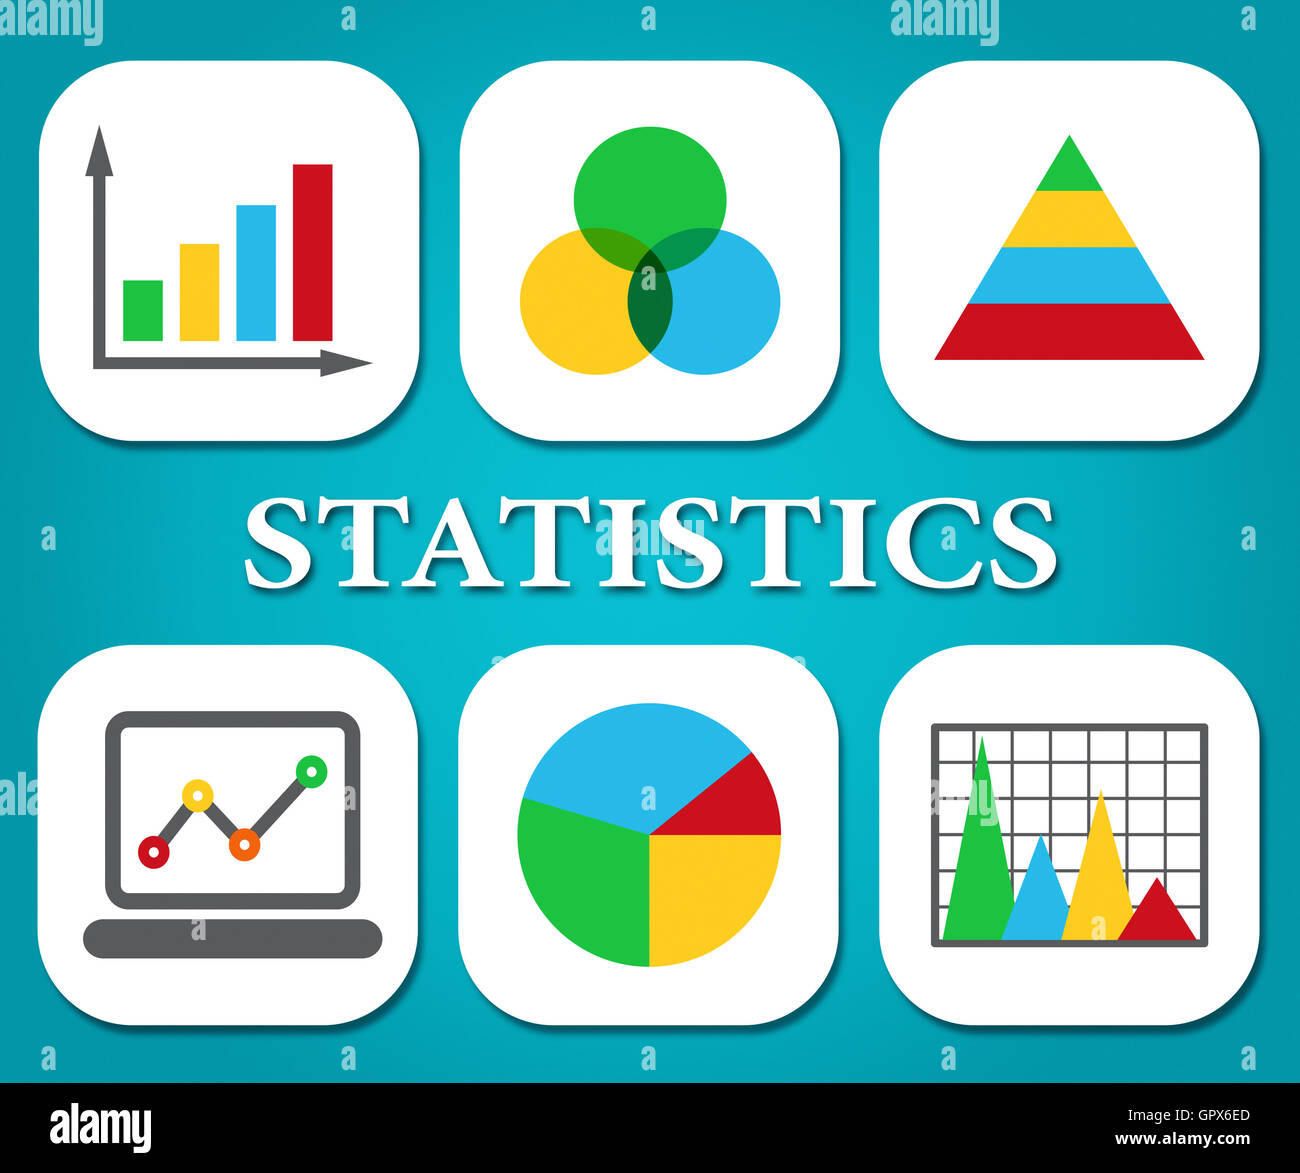 Statistics Charts Meaning Stats Statistical And Diagram Stock Photo